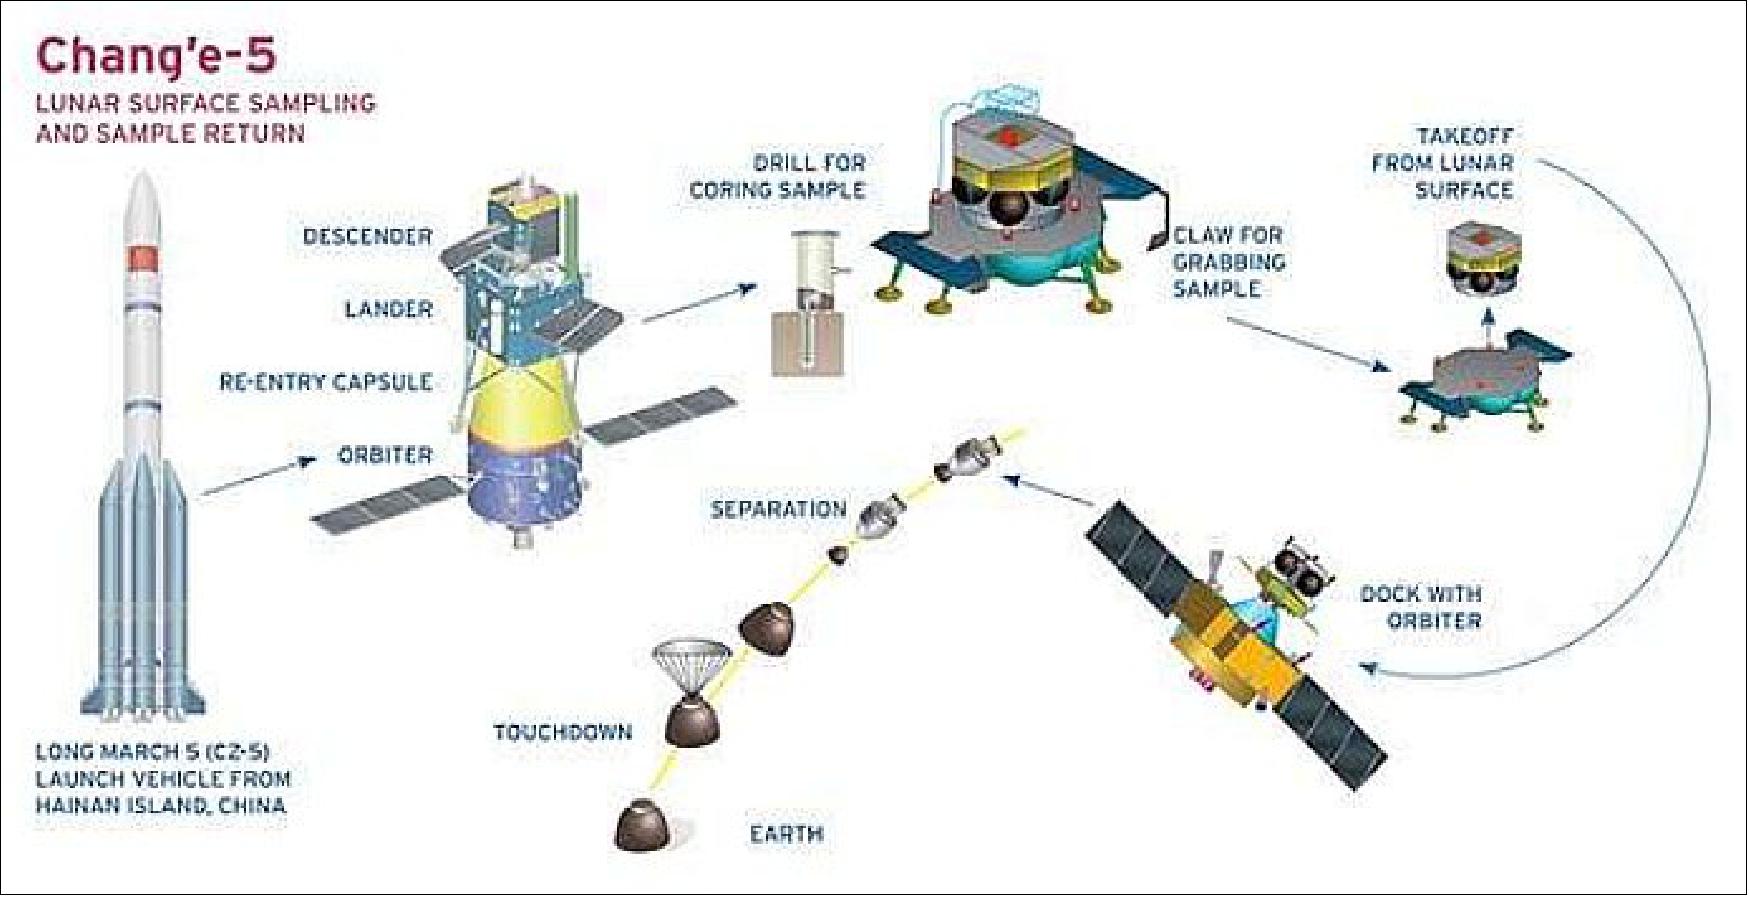 Figure 6: Overview of the various mission phases to return about 2 kg of lunar surface material to Earth (image credit: CNSA) 4)